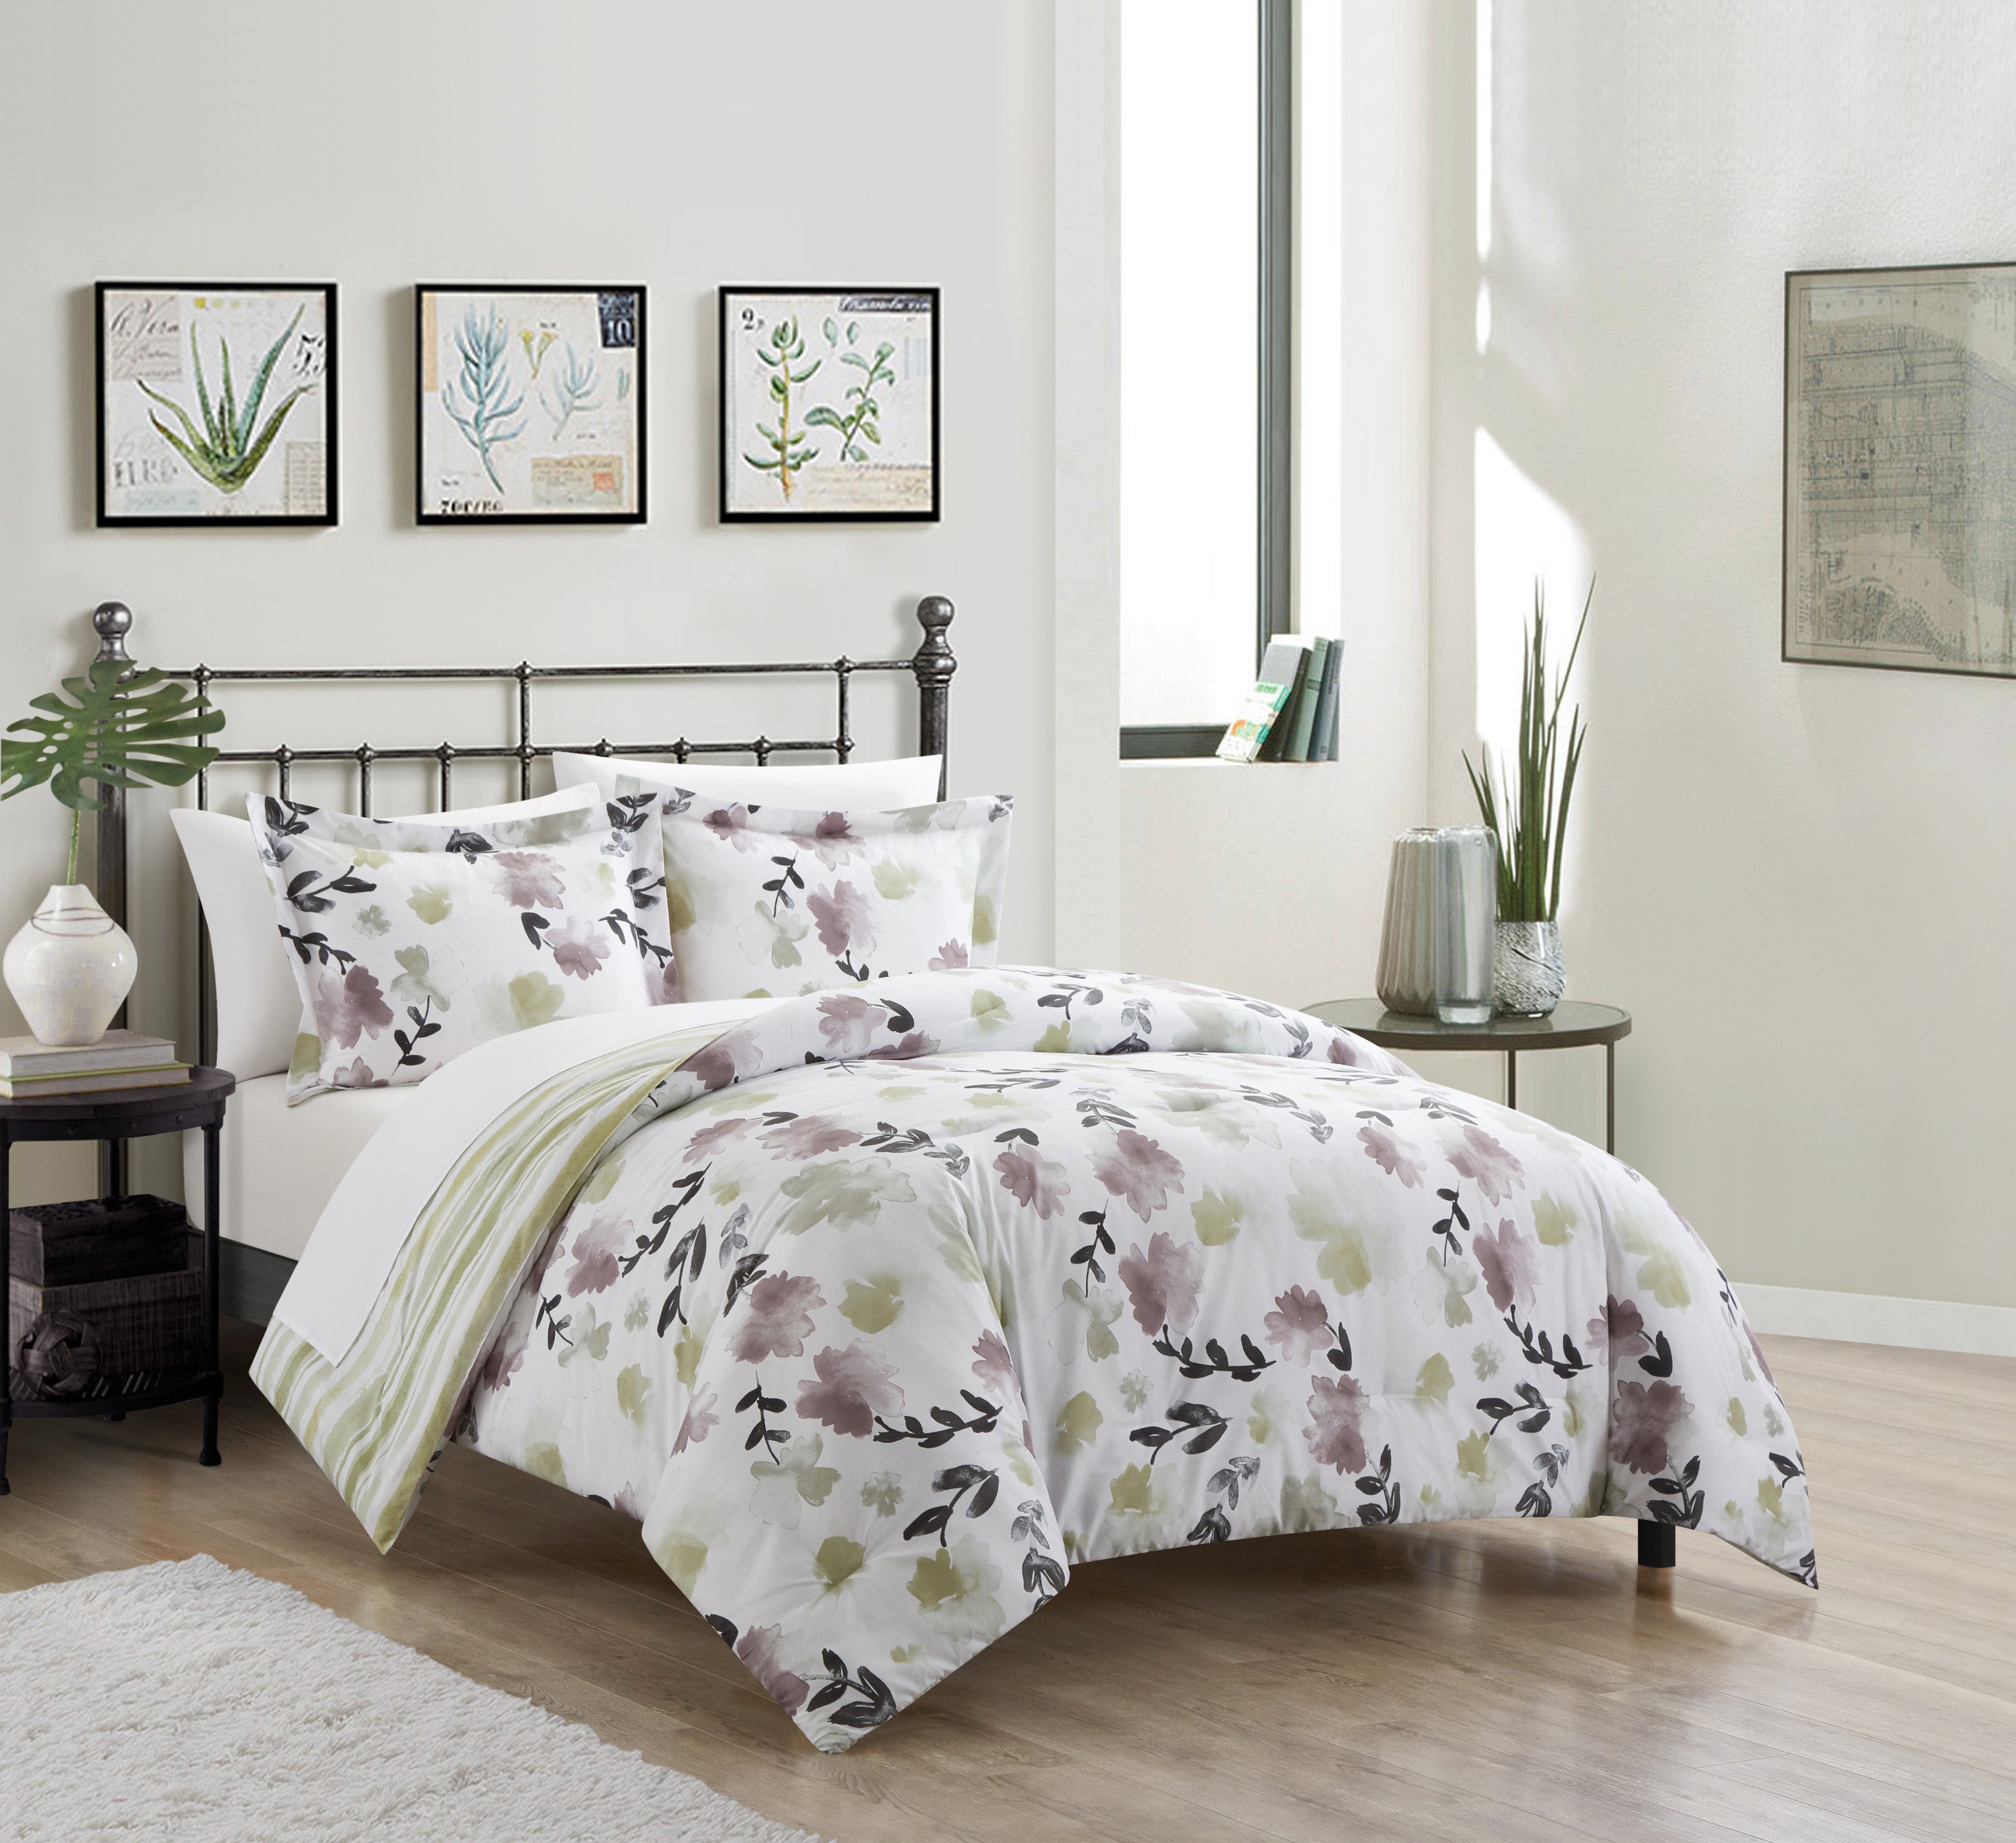 Everly Green 3 Piece Reversible Watercolor Floral Print Duvet Cover Set